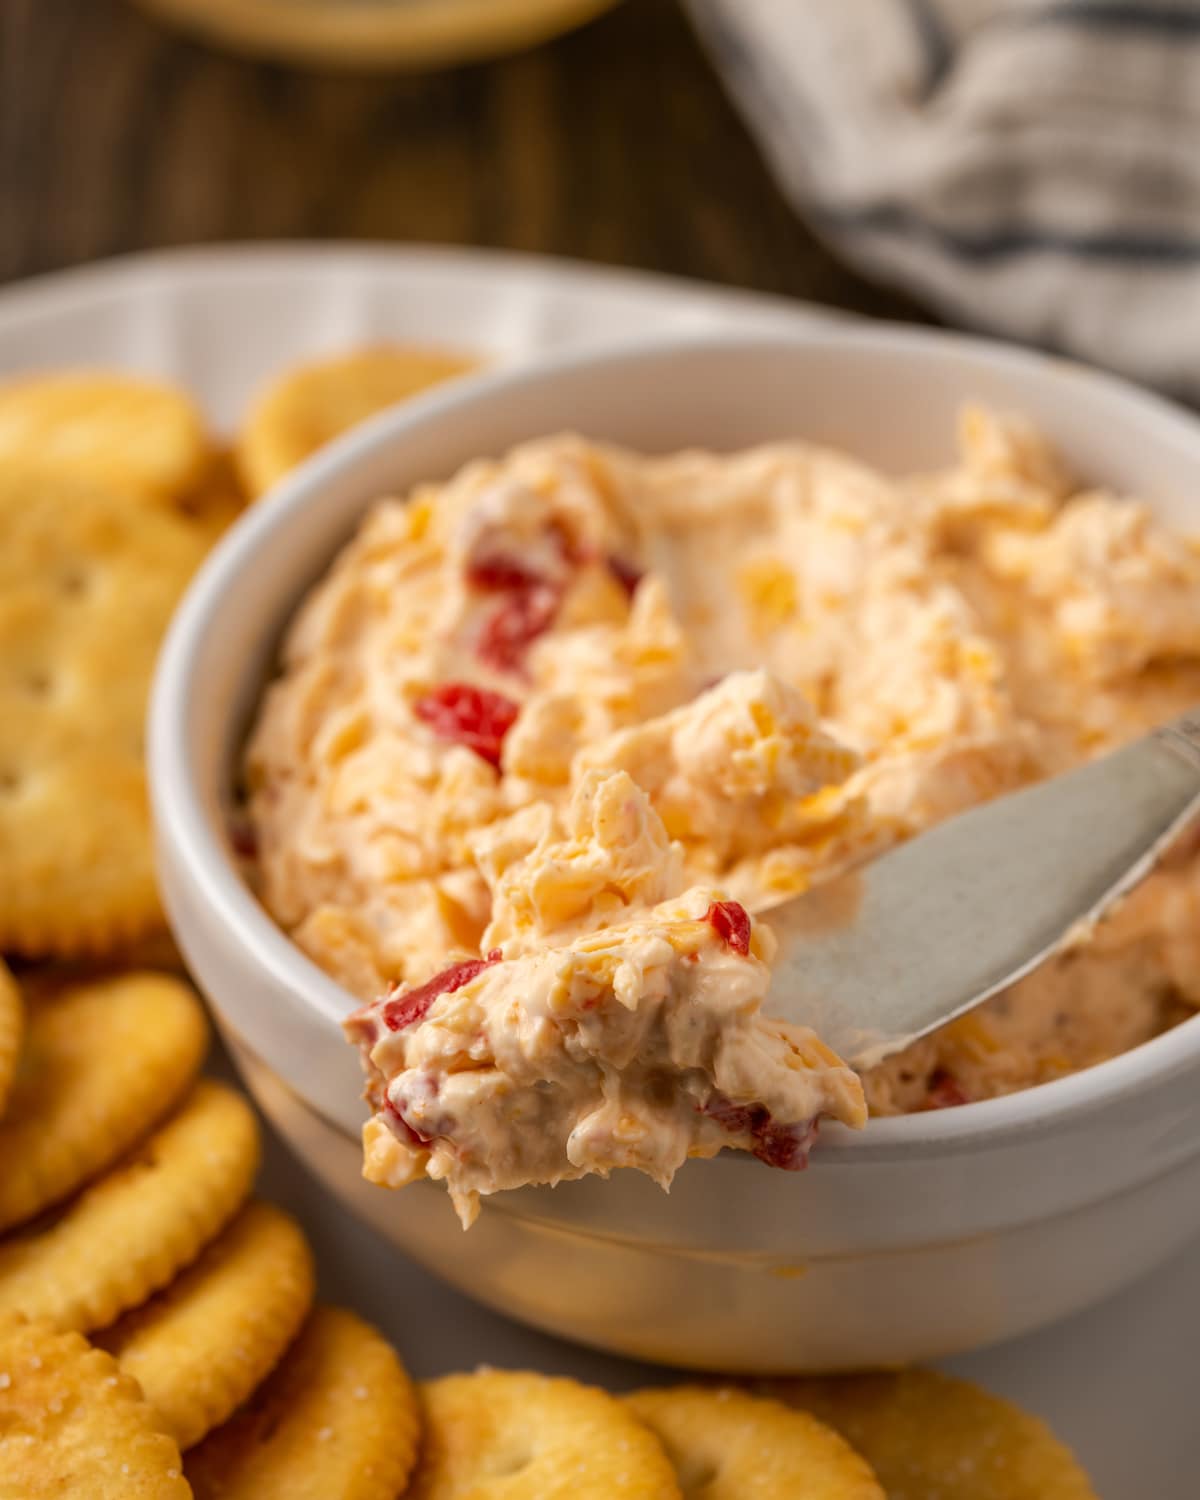 A close up of a bowl of pimento cheese with a cheese knife on a platter of crackers.